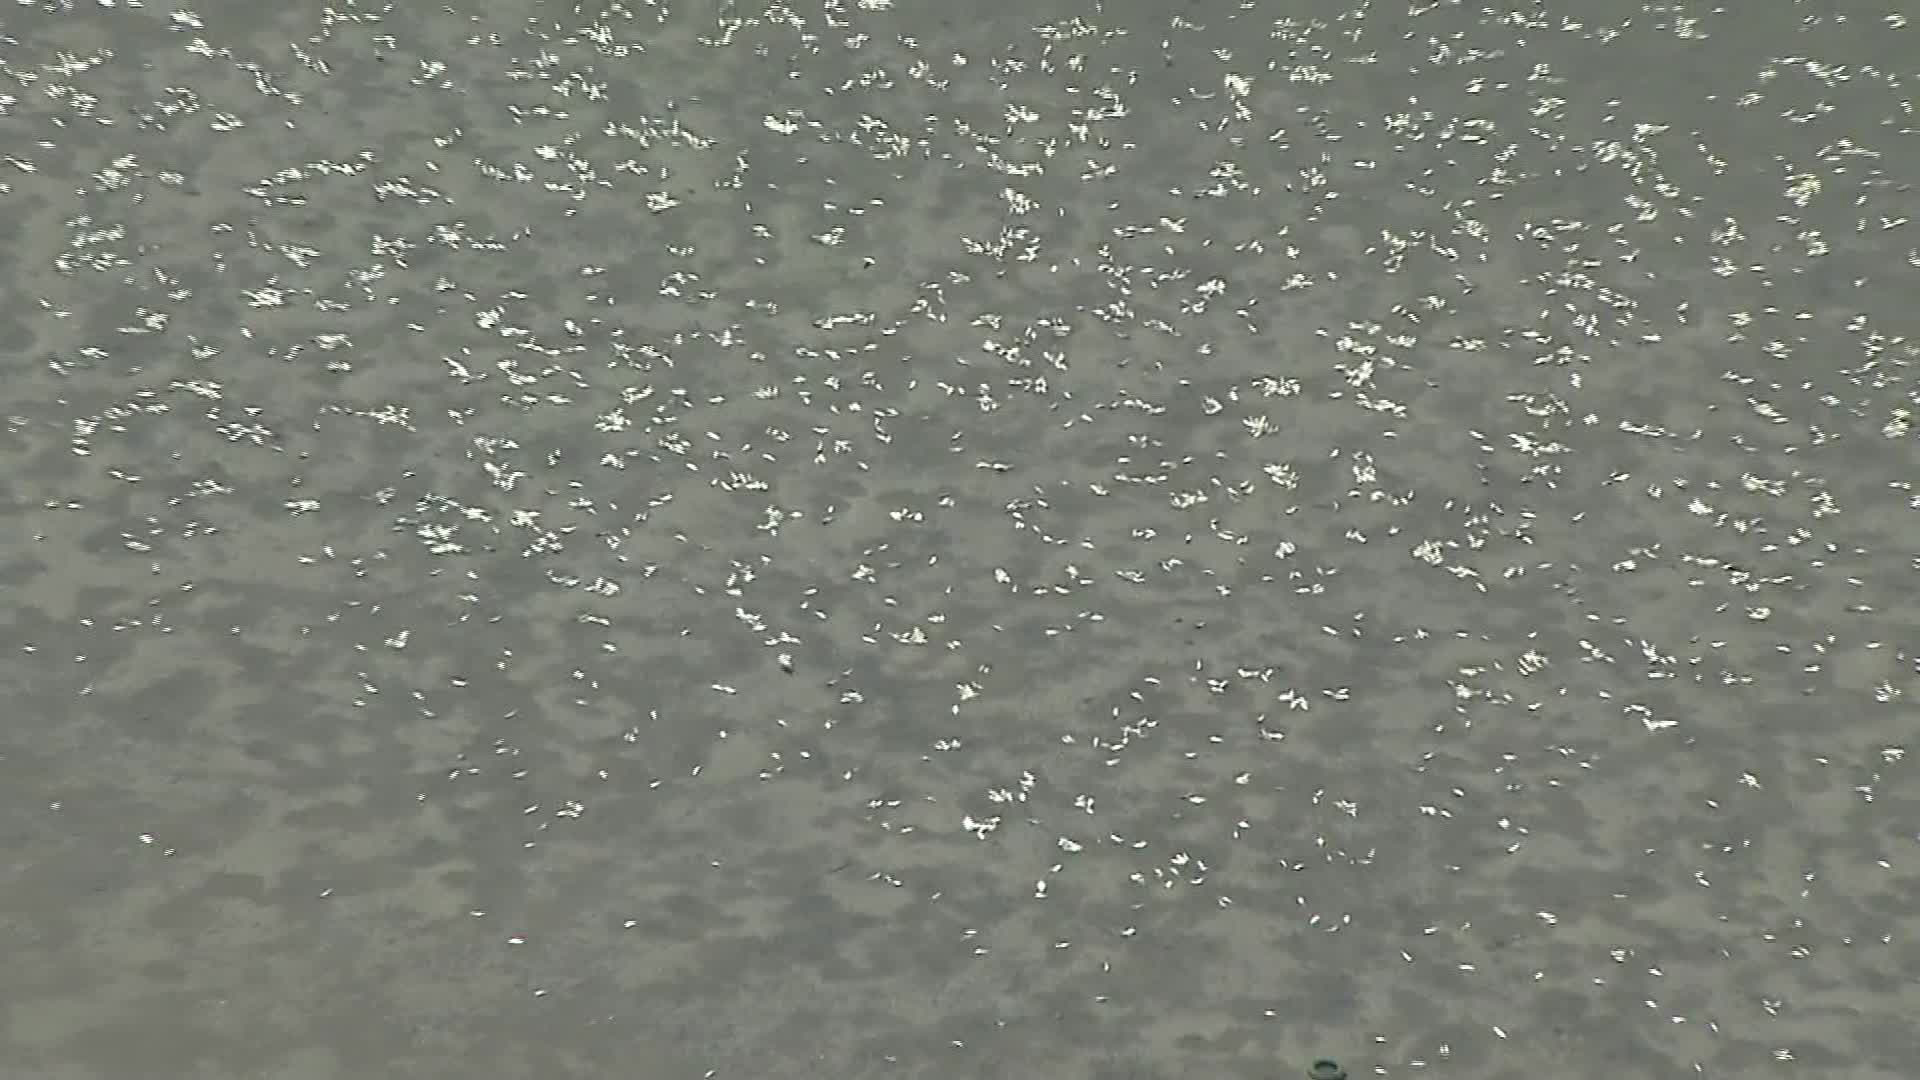 Footage shows scores of dead fish in Belmar, NJ on May 12, 2014. (credit: CBS 2) 